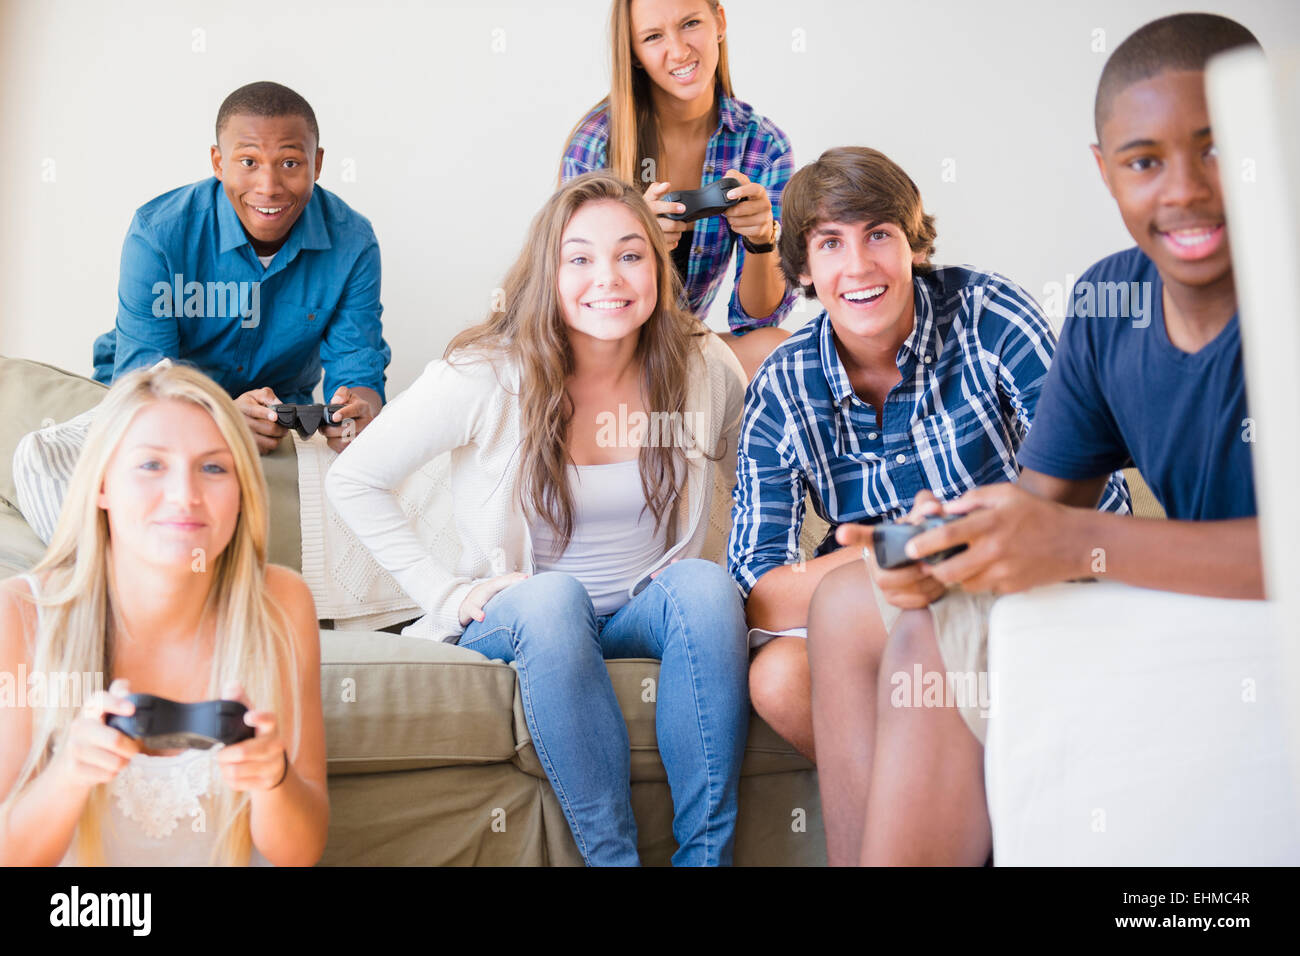 Teenagers playing video games in living room Stock Photo